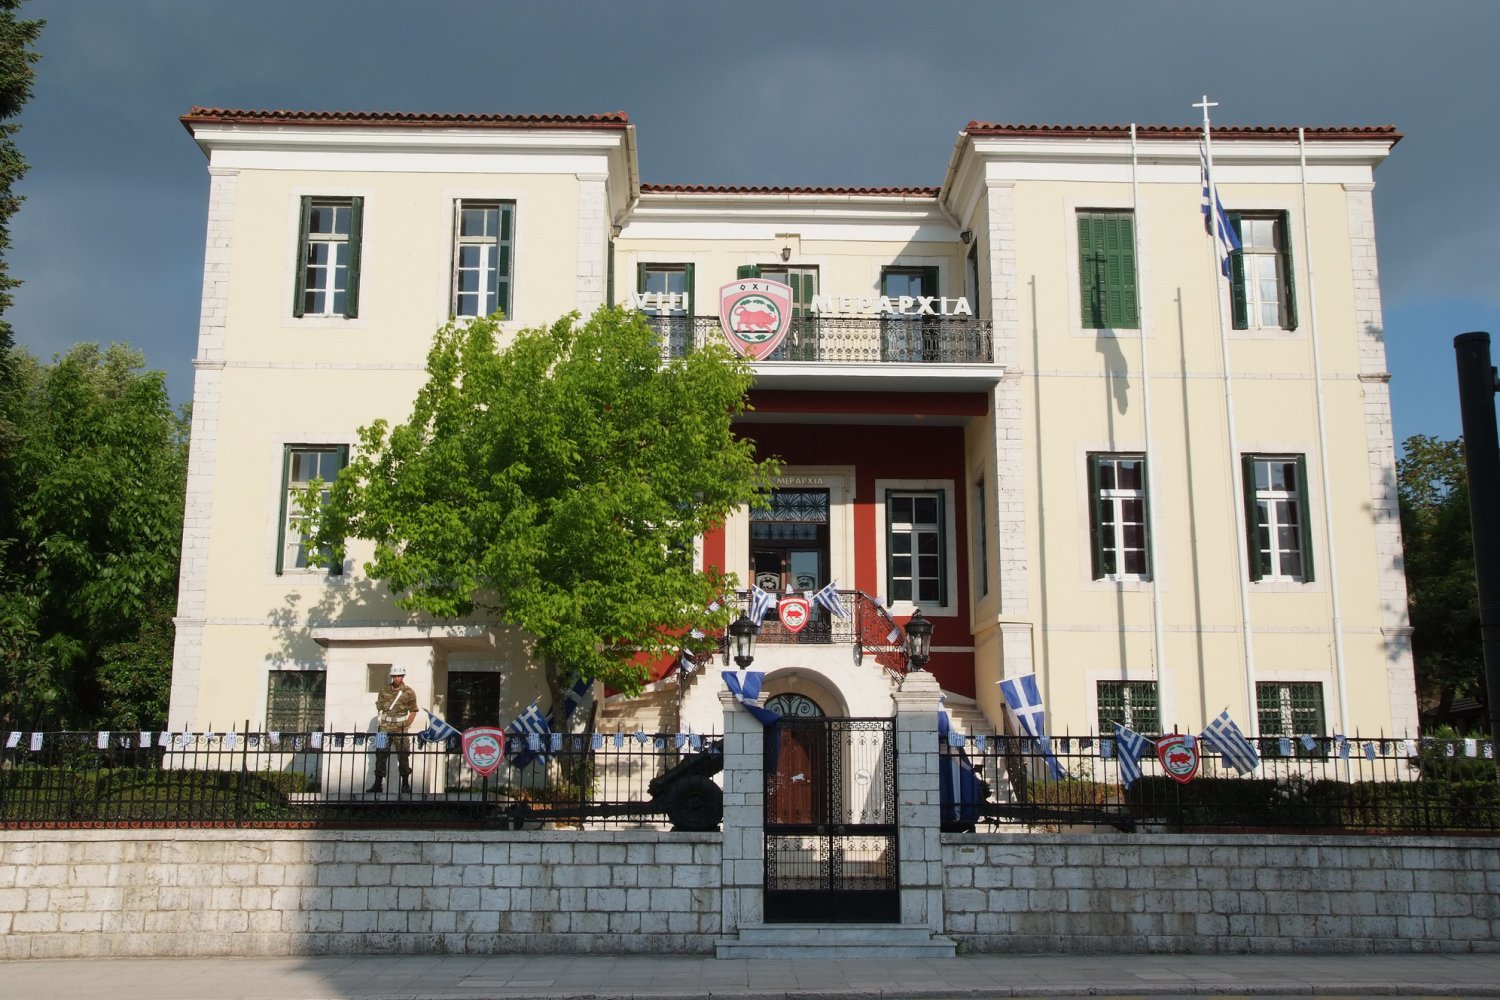 The building of the VIII Division (Eleftherias Square)